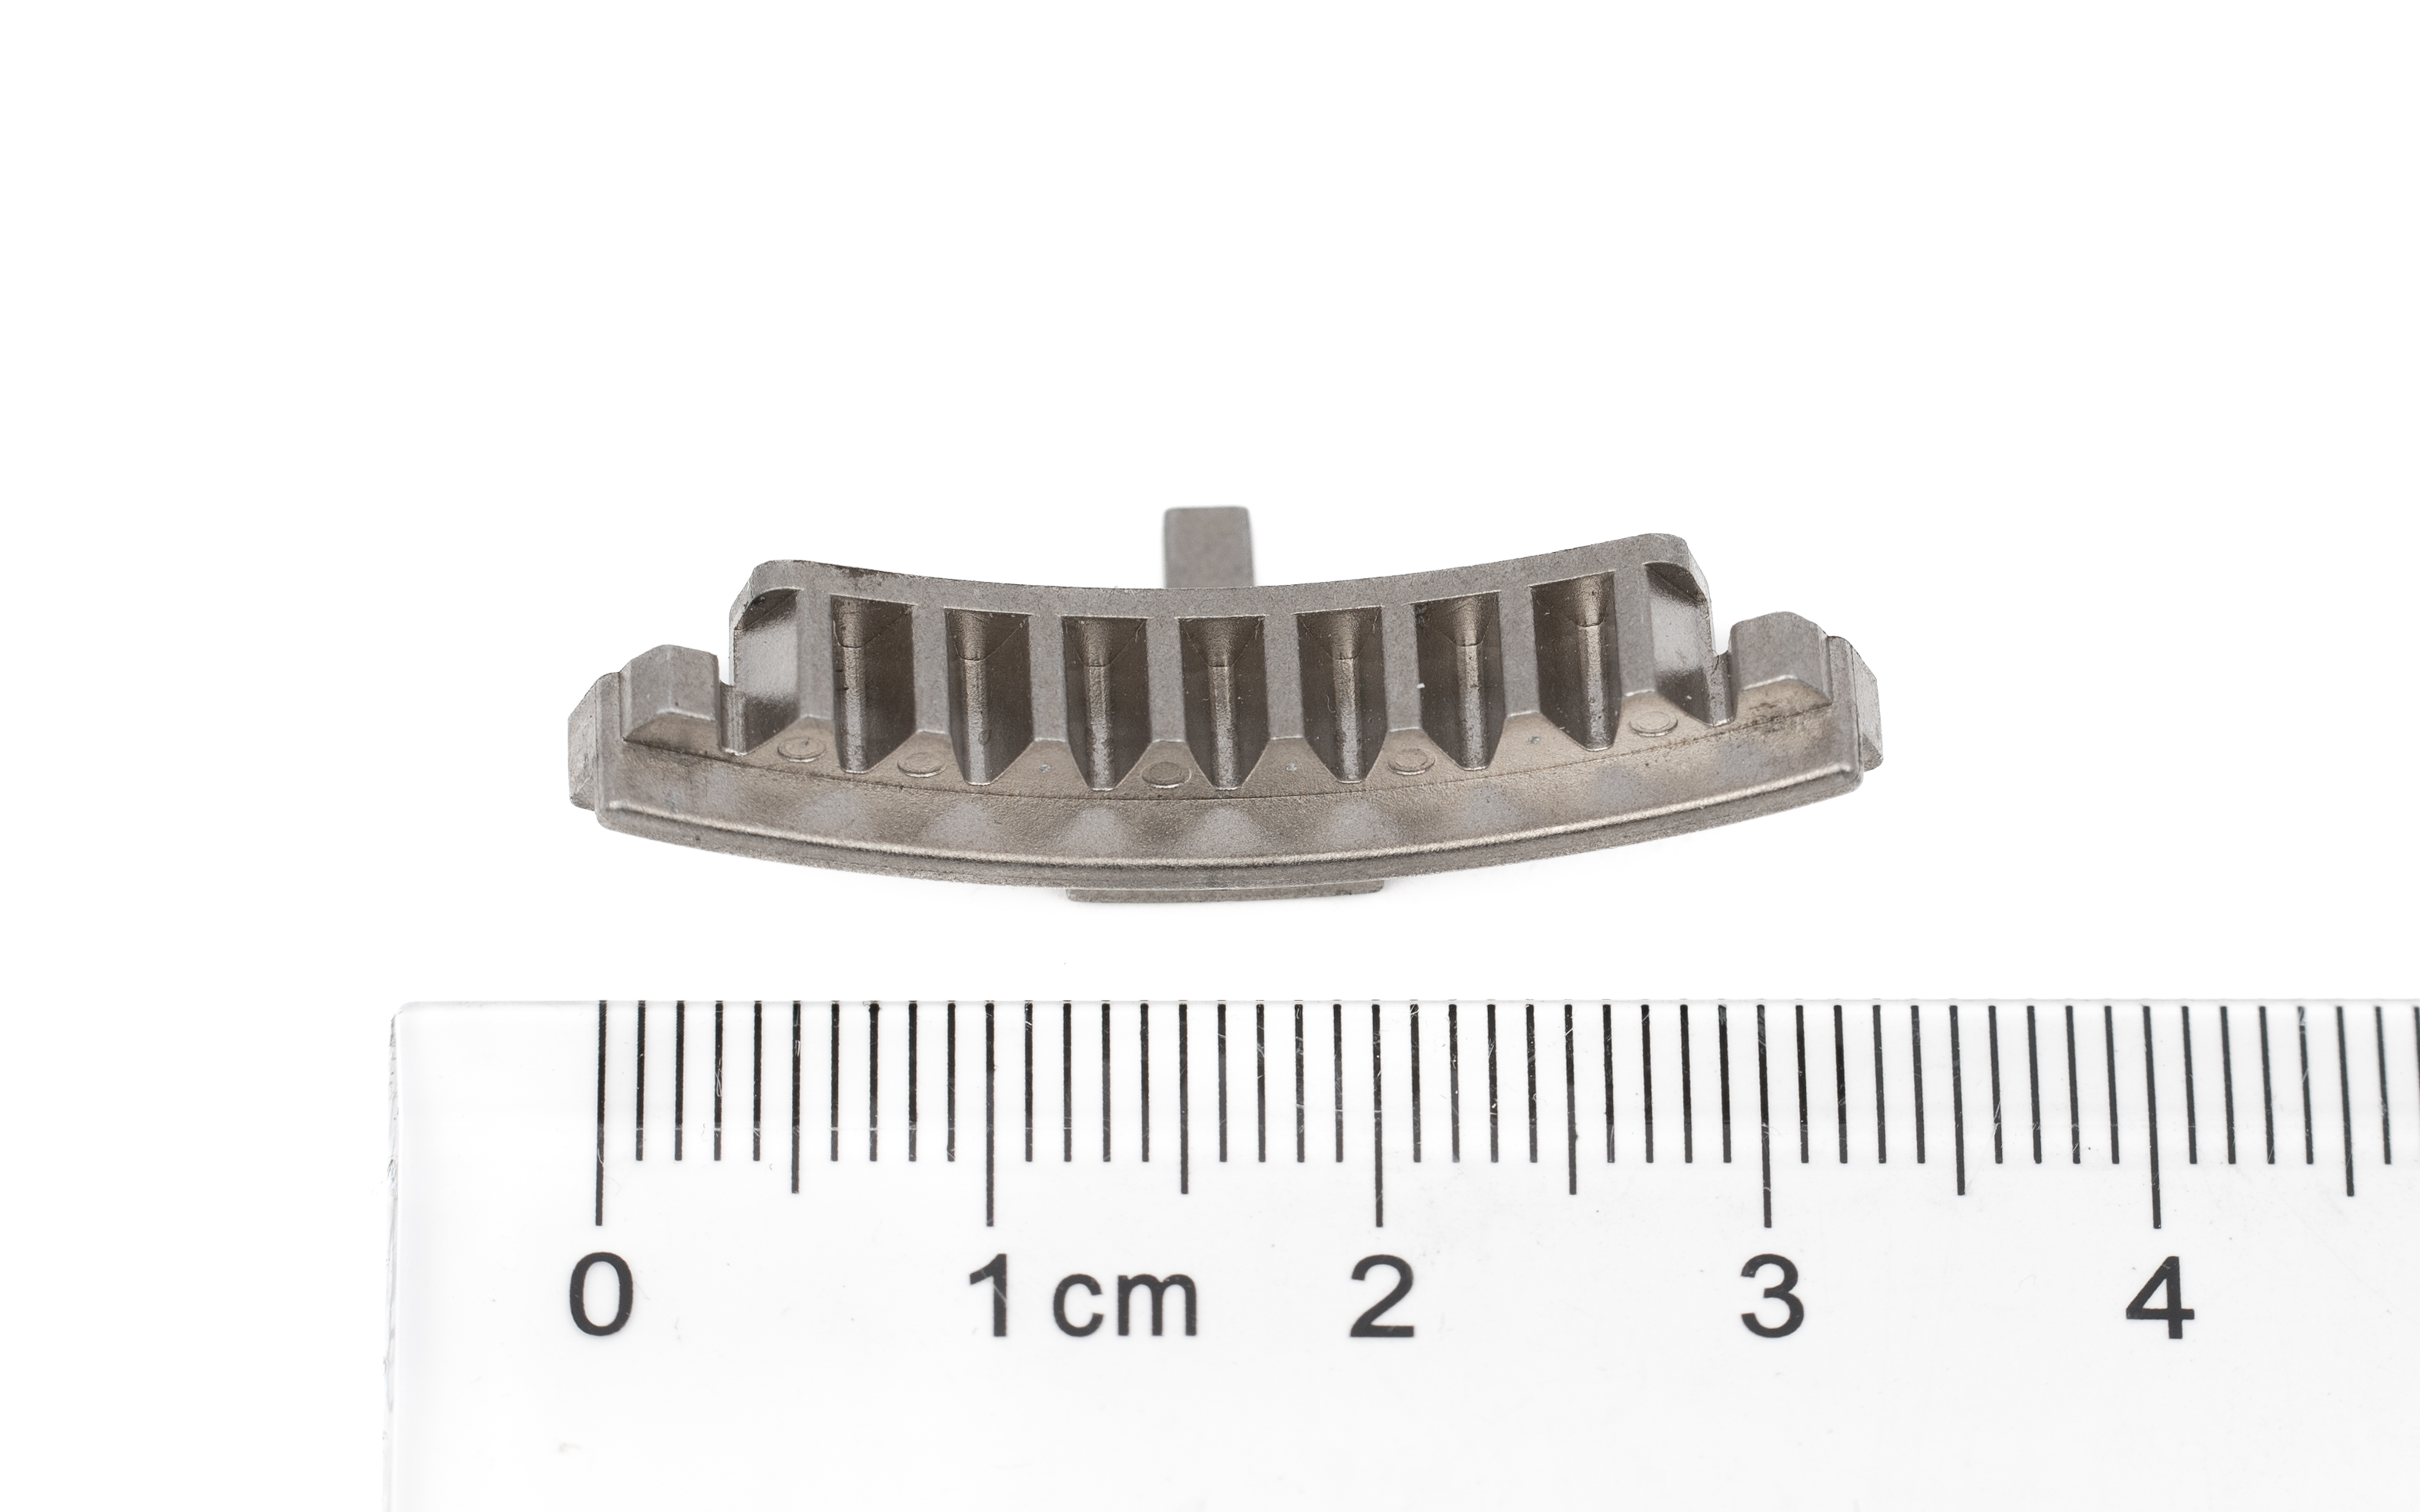 Dental Implant Components